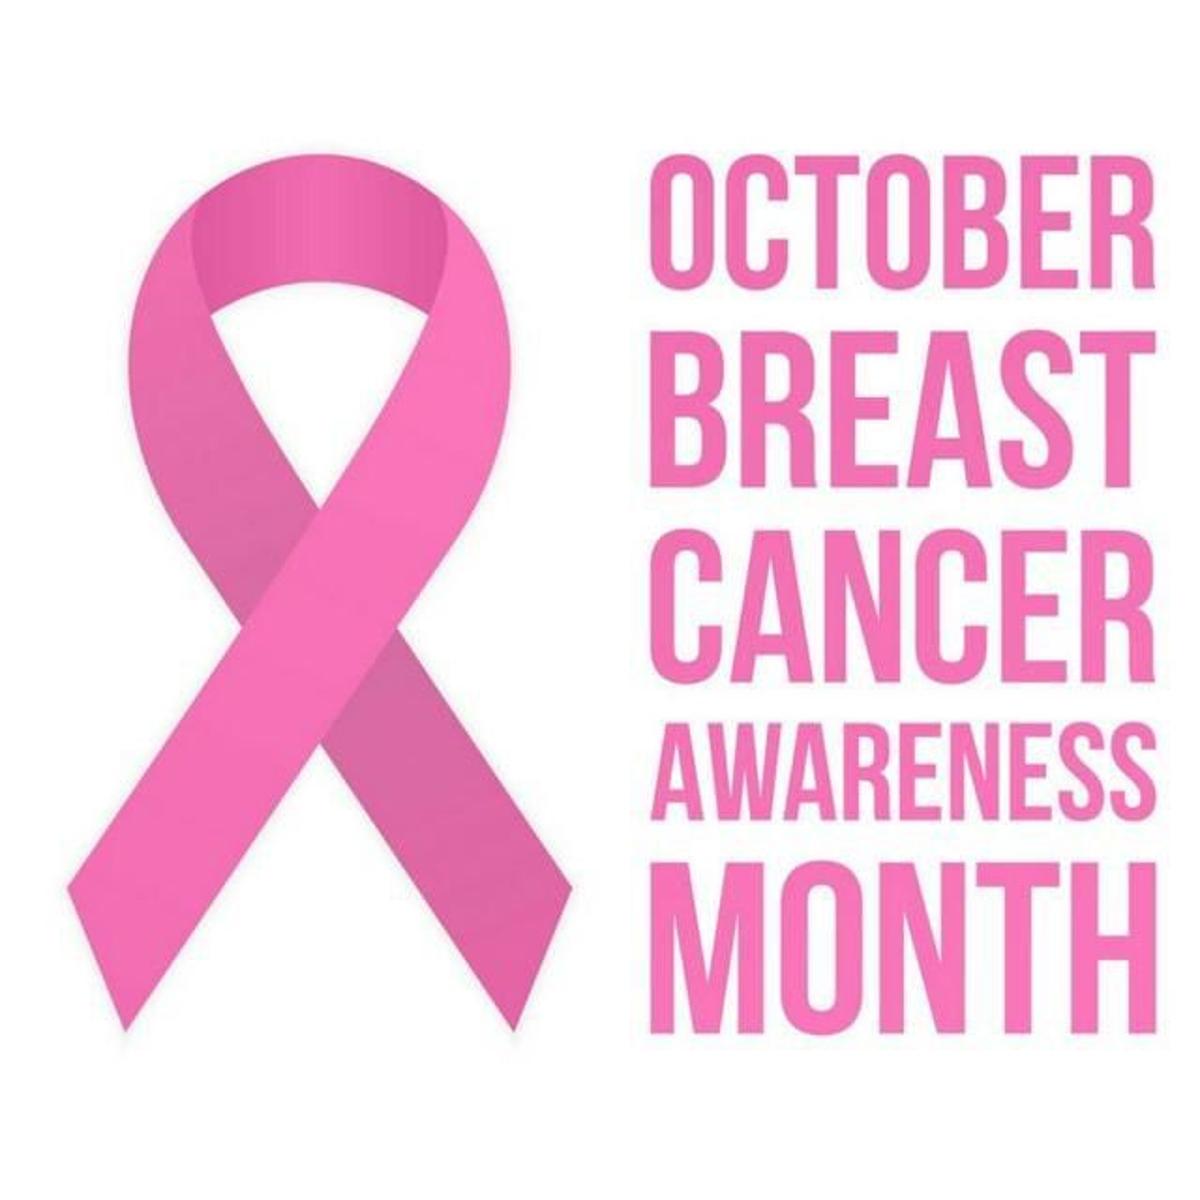 Note: Pink month means it's Breast Cancer Awareness Month, Opinion